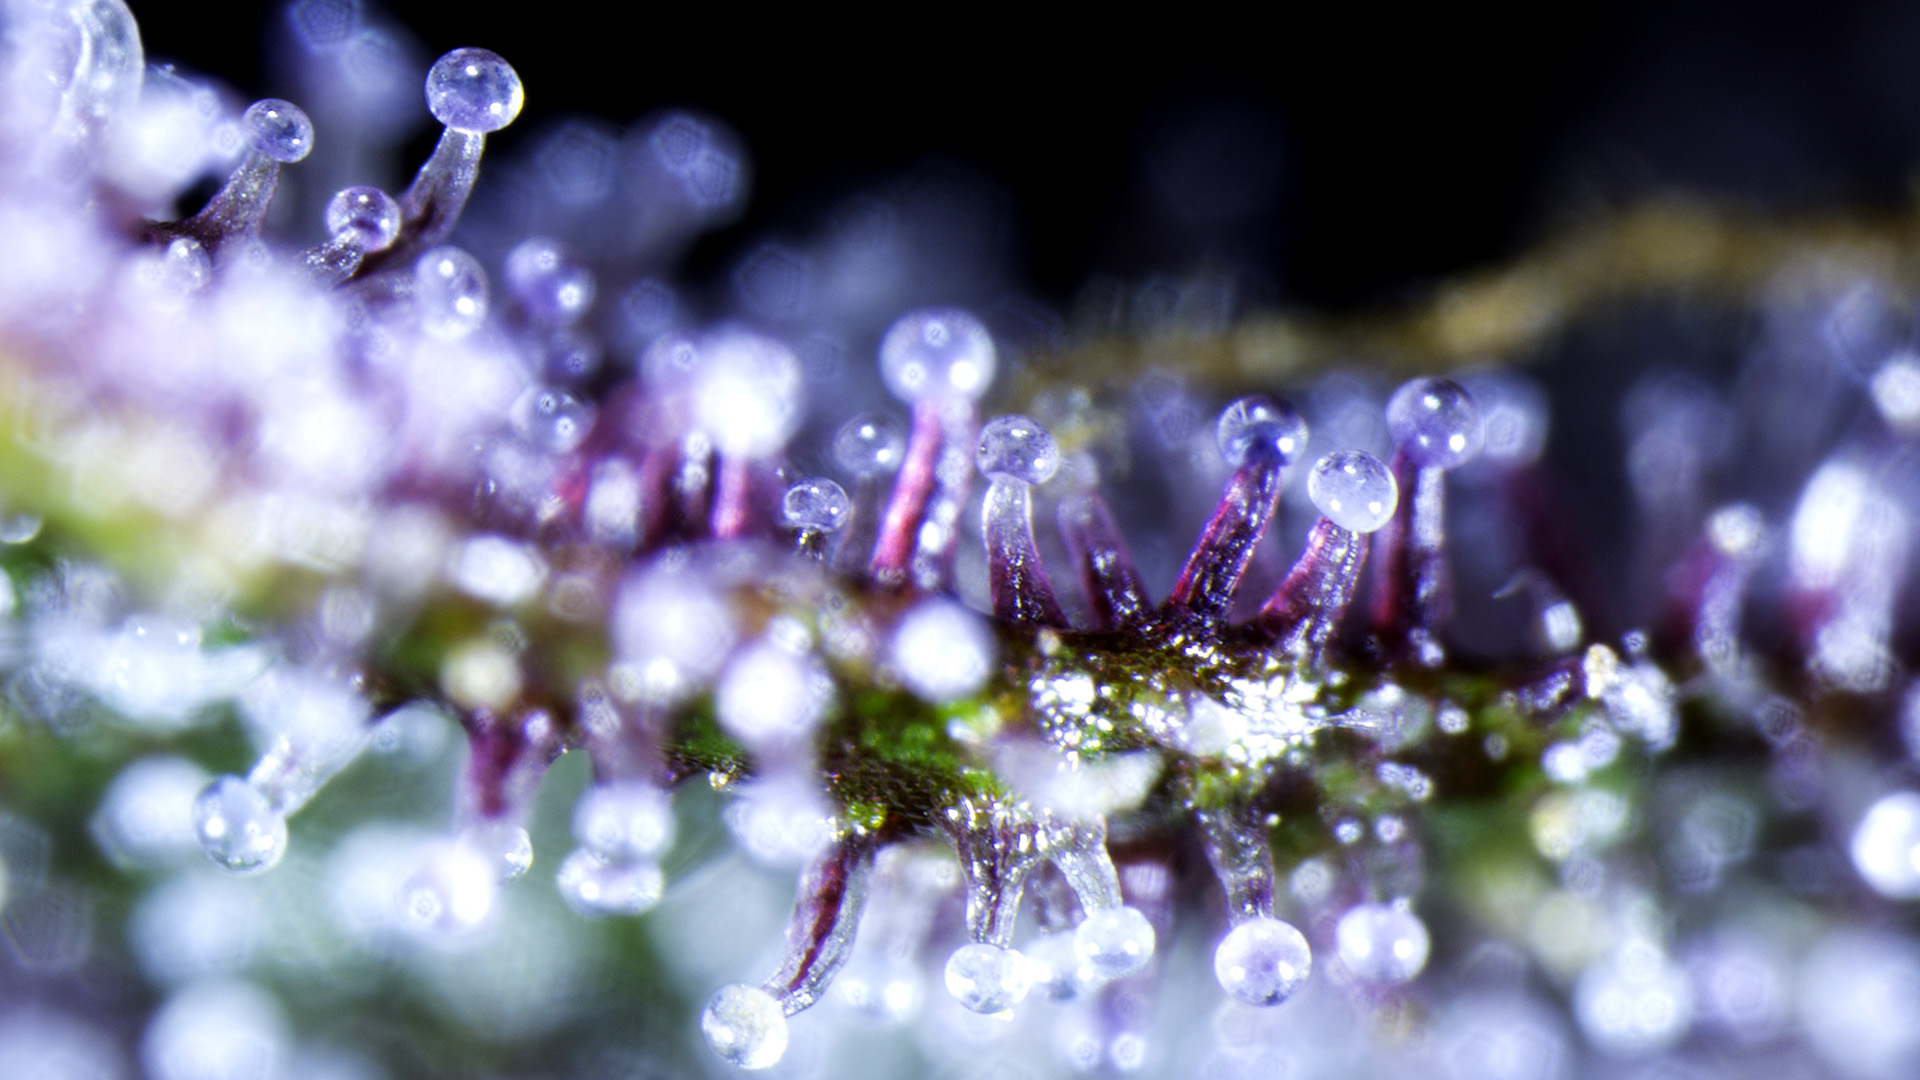 A magnified close-up trichomes on a cannabis plant